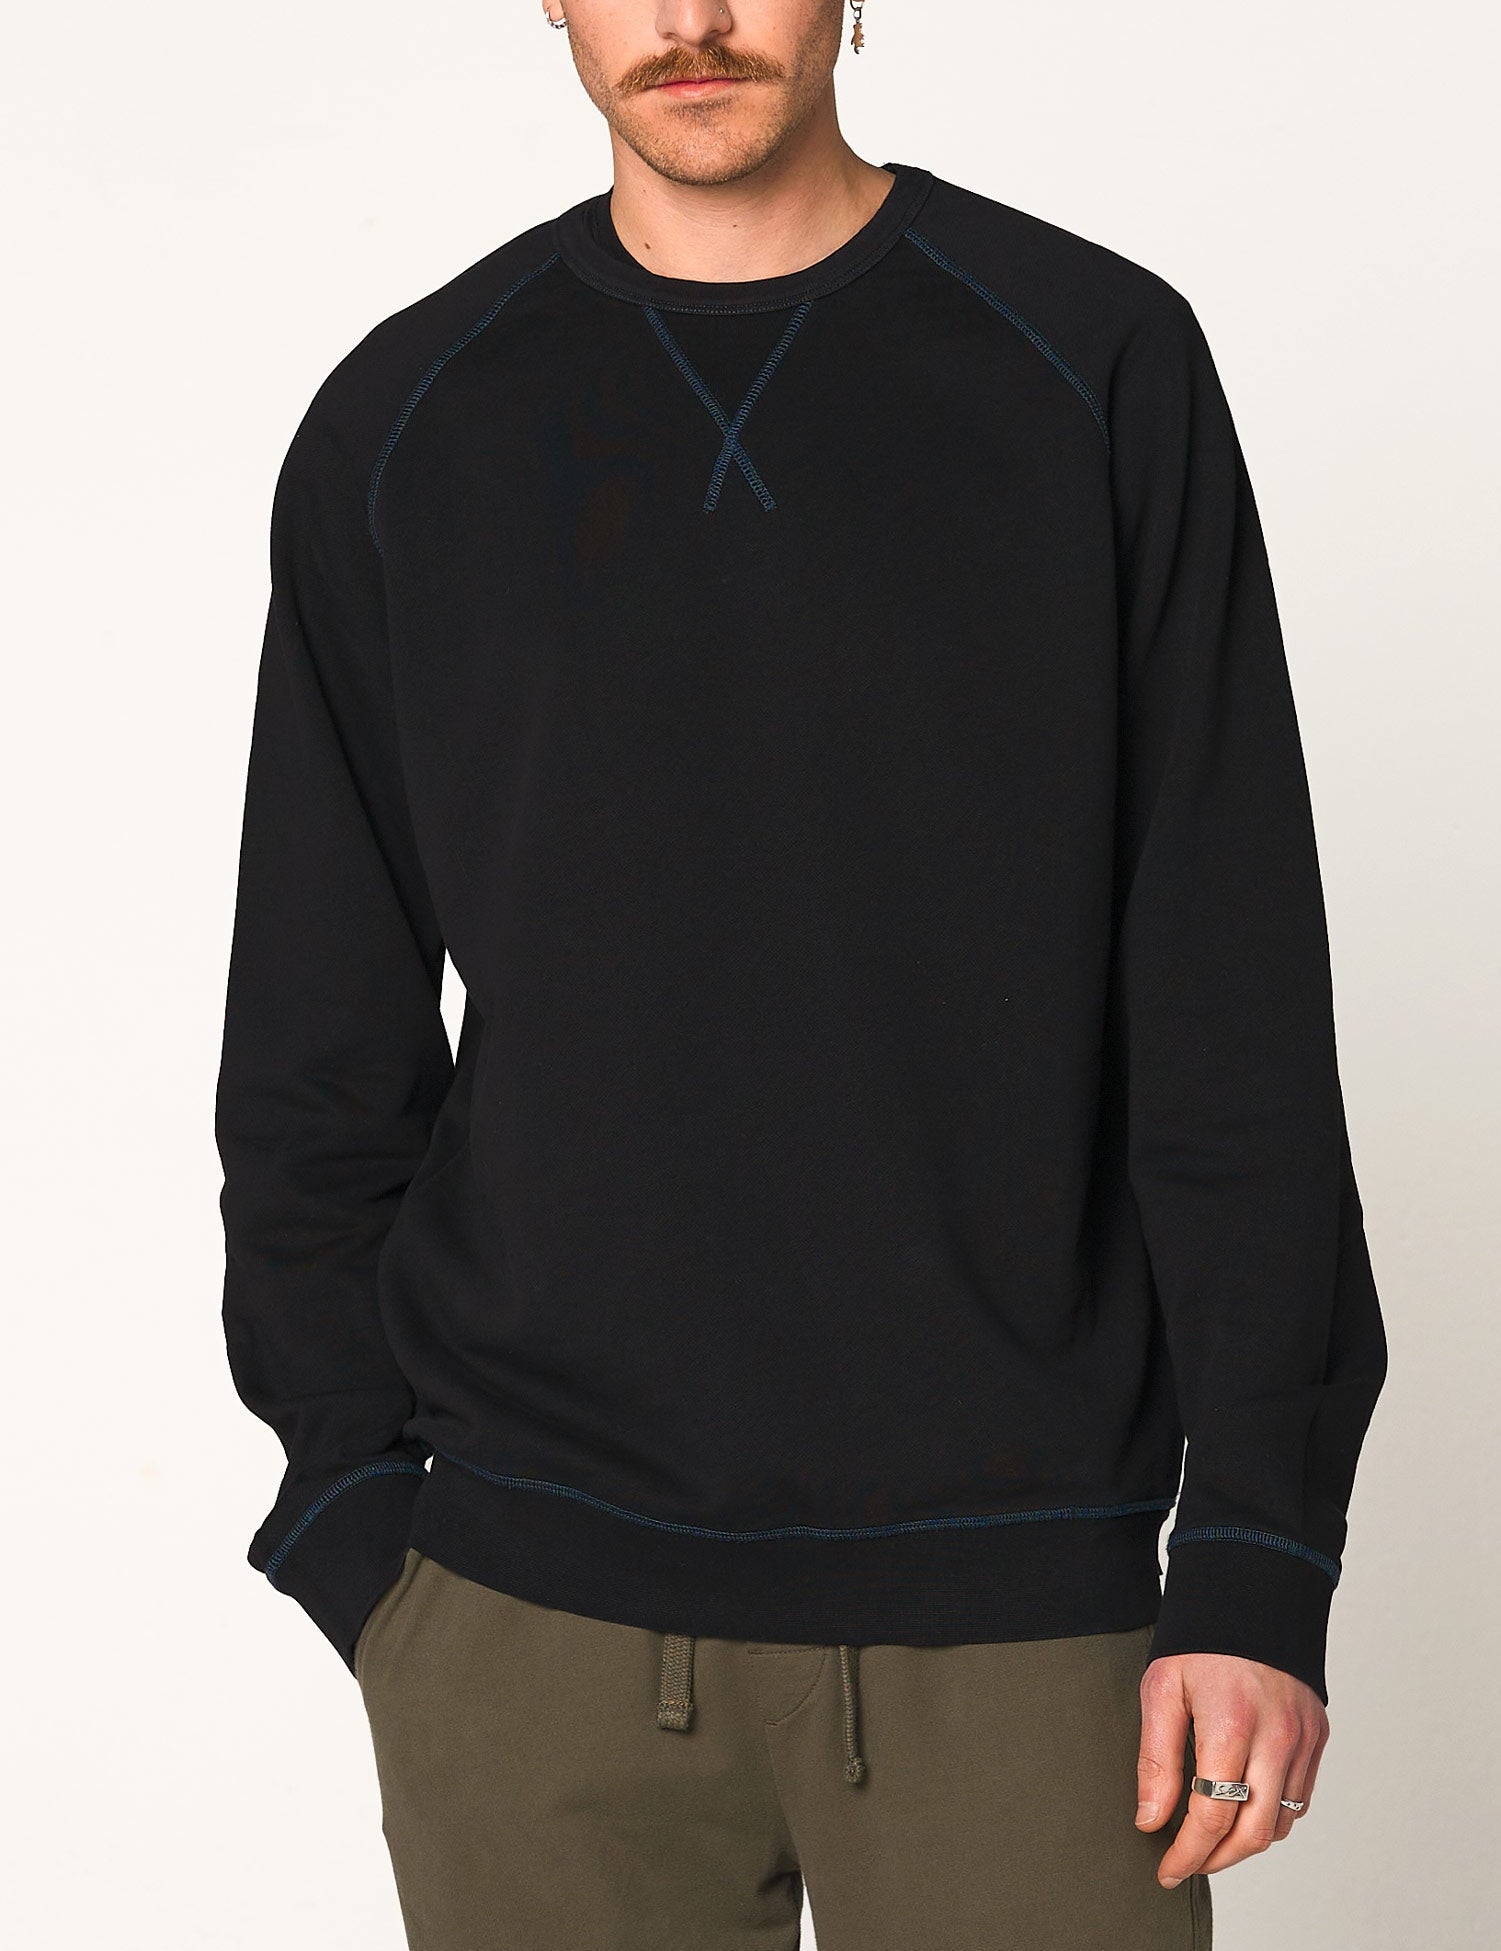 ITEM No. 03 – Sweater Black Overdyed - Standard Project